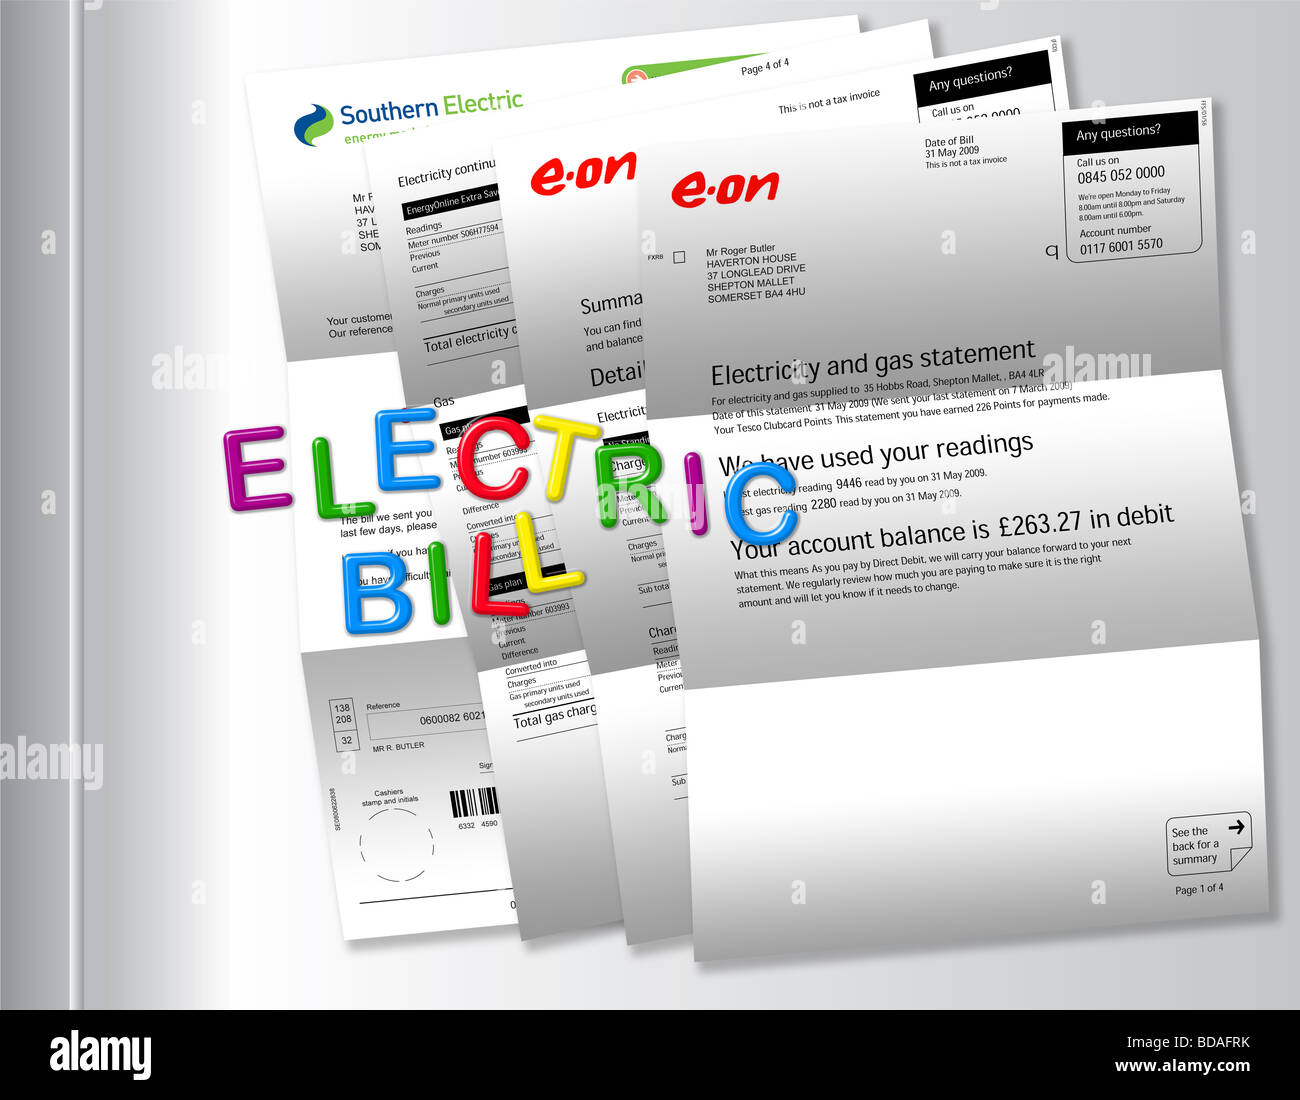 Electric bills on fridge with ‘TO BE PAID’ spelt out by magnetic fridge letters. Stock Photo